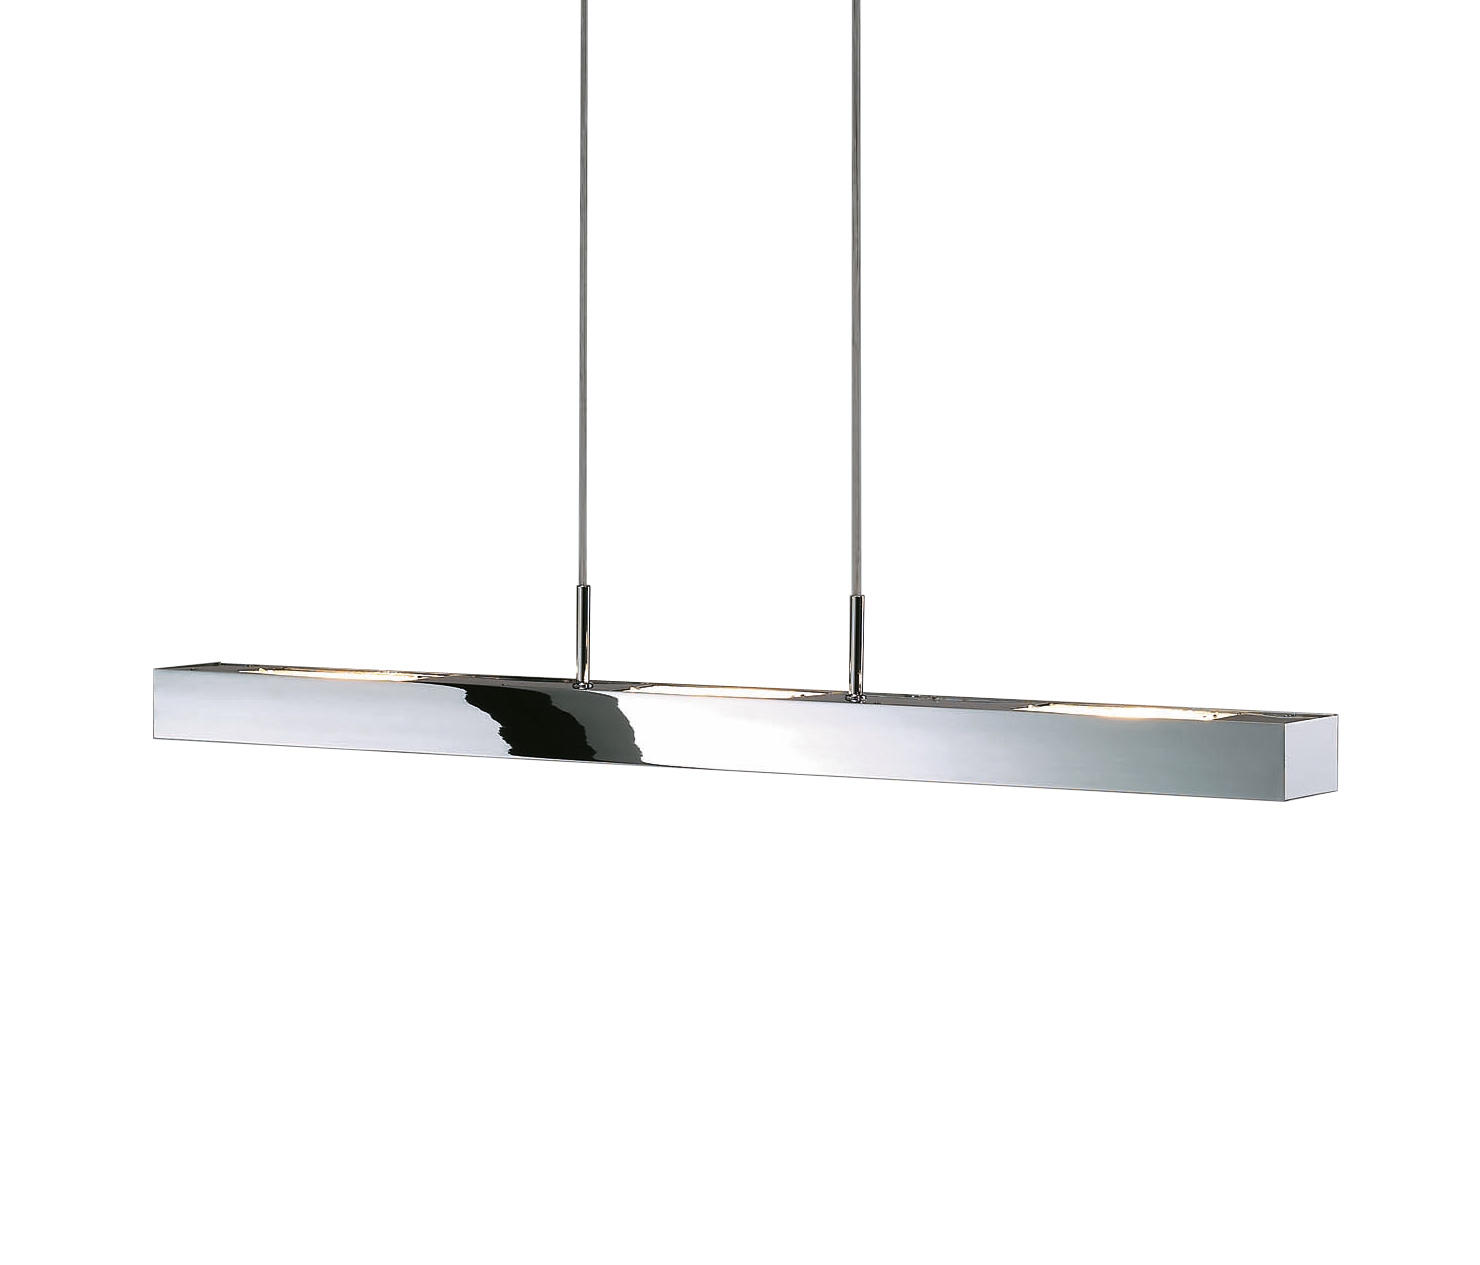 Box Hl 90 Suspended Lights From Decor Walther Architonic